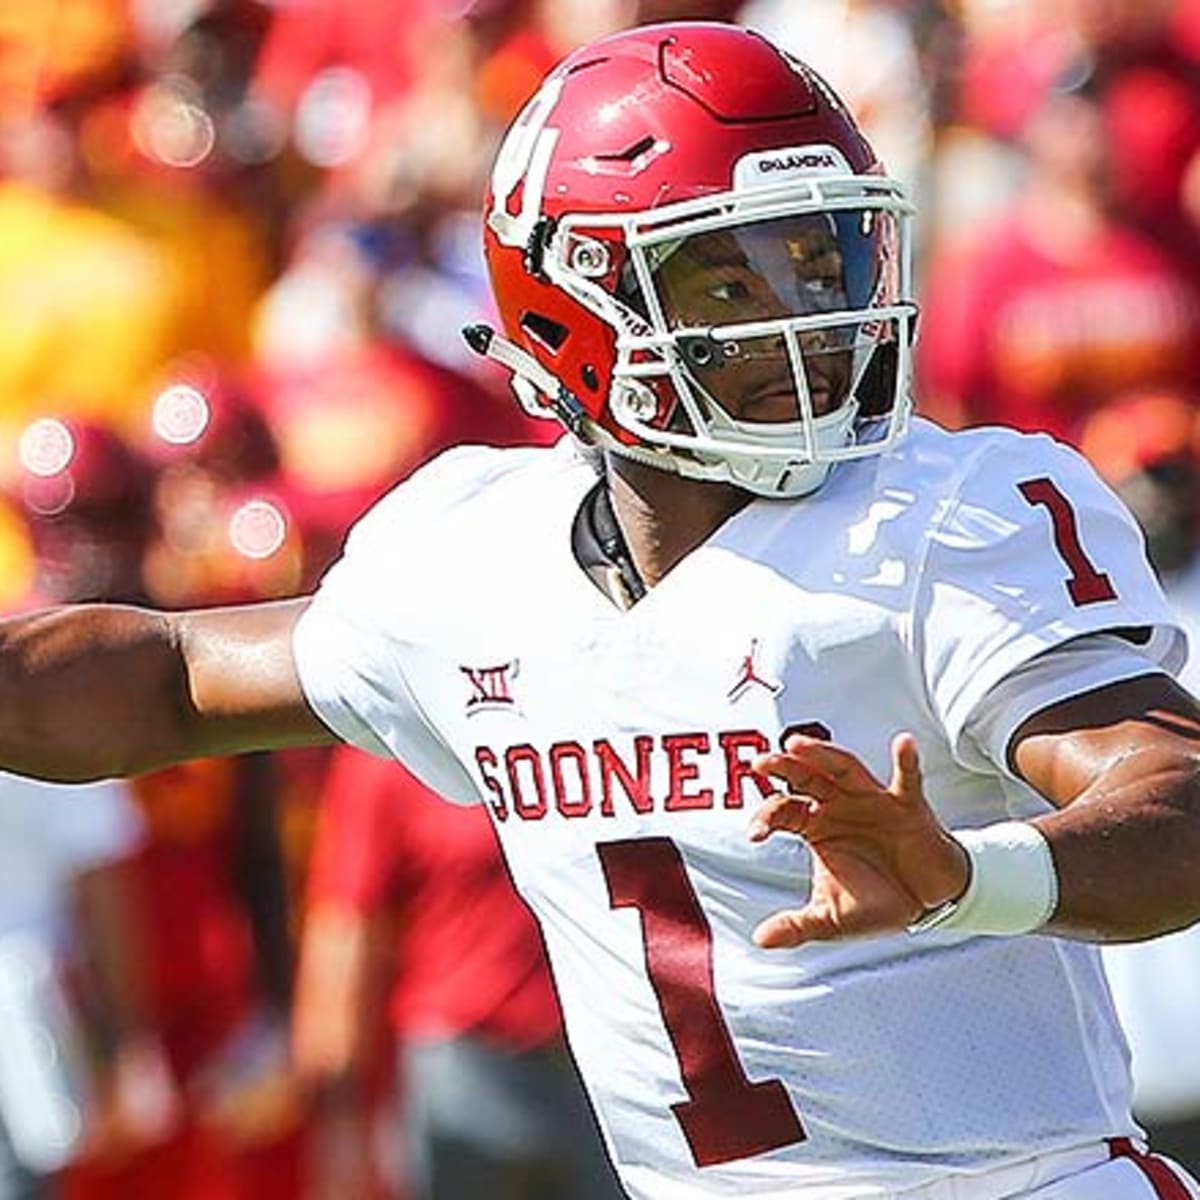 A's, MLB meet with Kyler Murray to discuss future